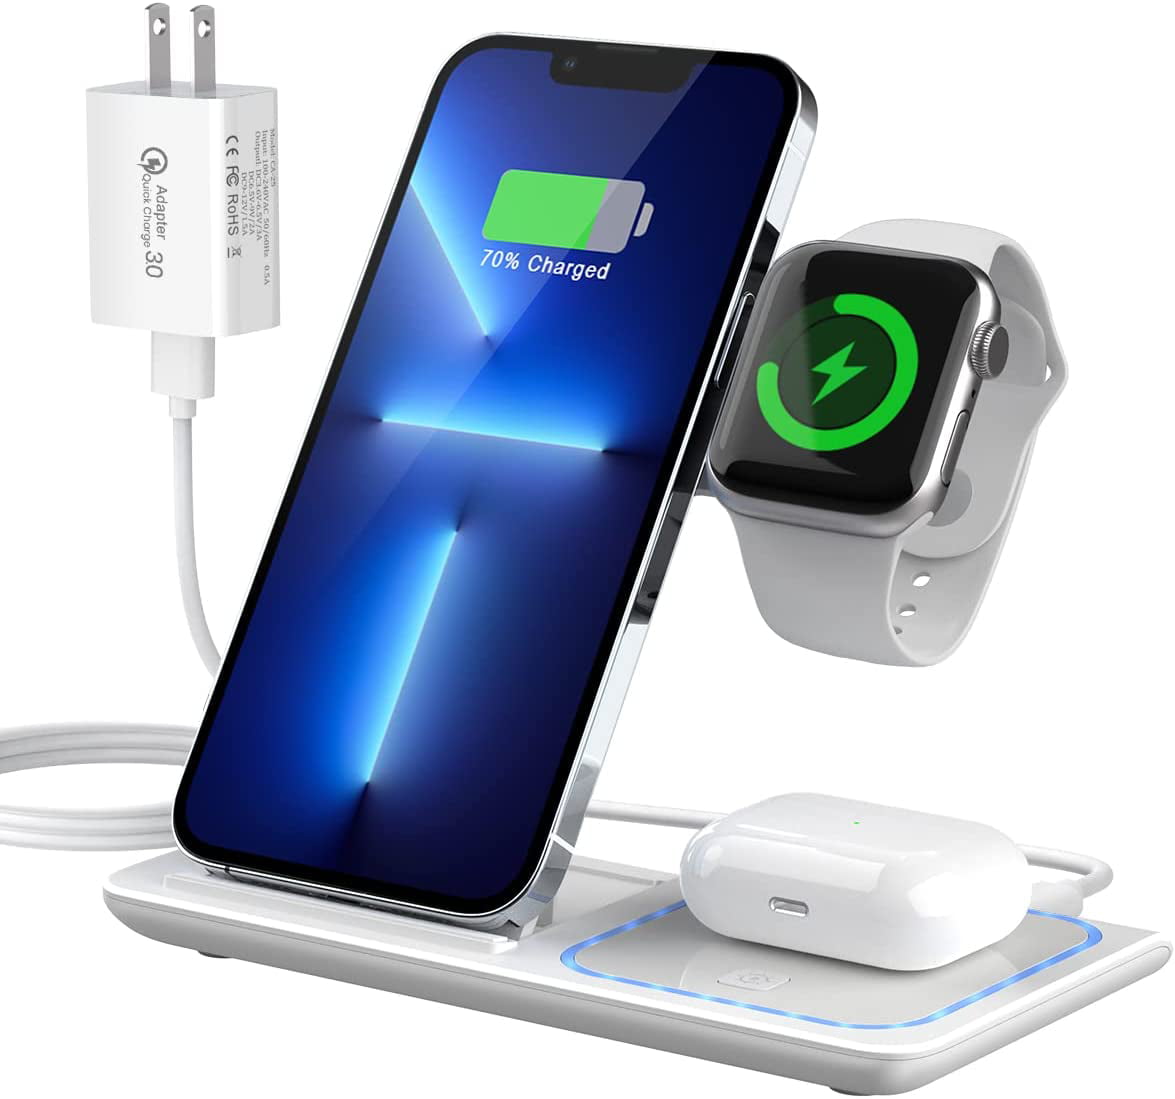 sammen Nysgerrighed Baron Wireless Charging Station For IPad, IPhone, Apple Watch,